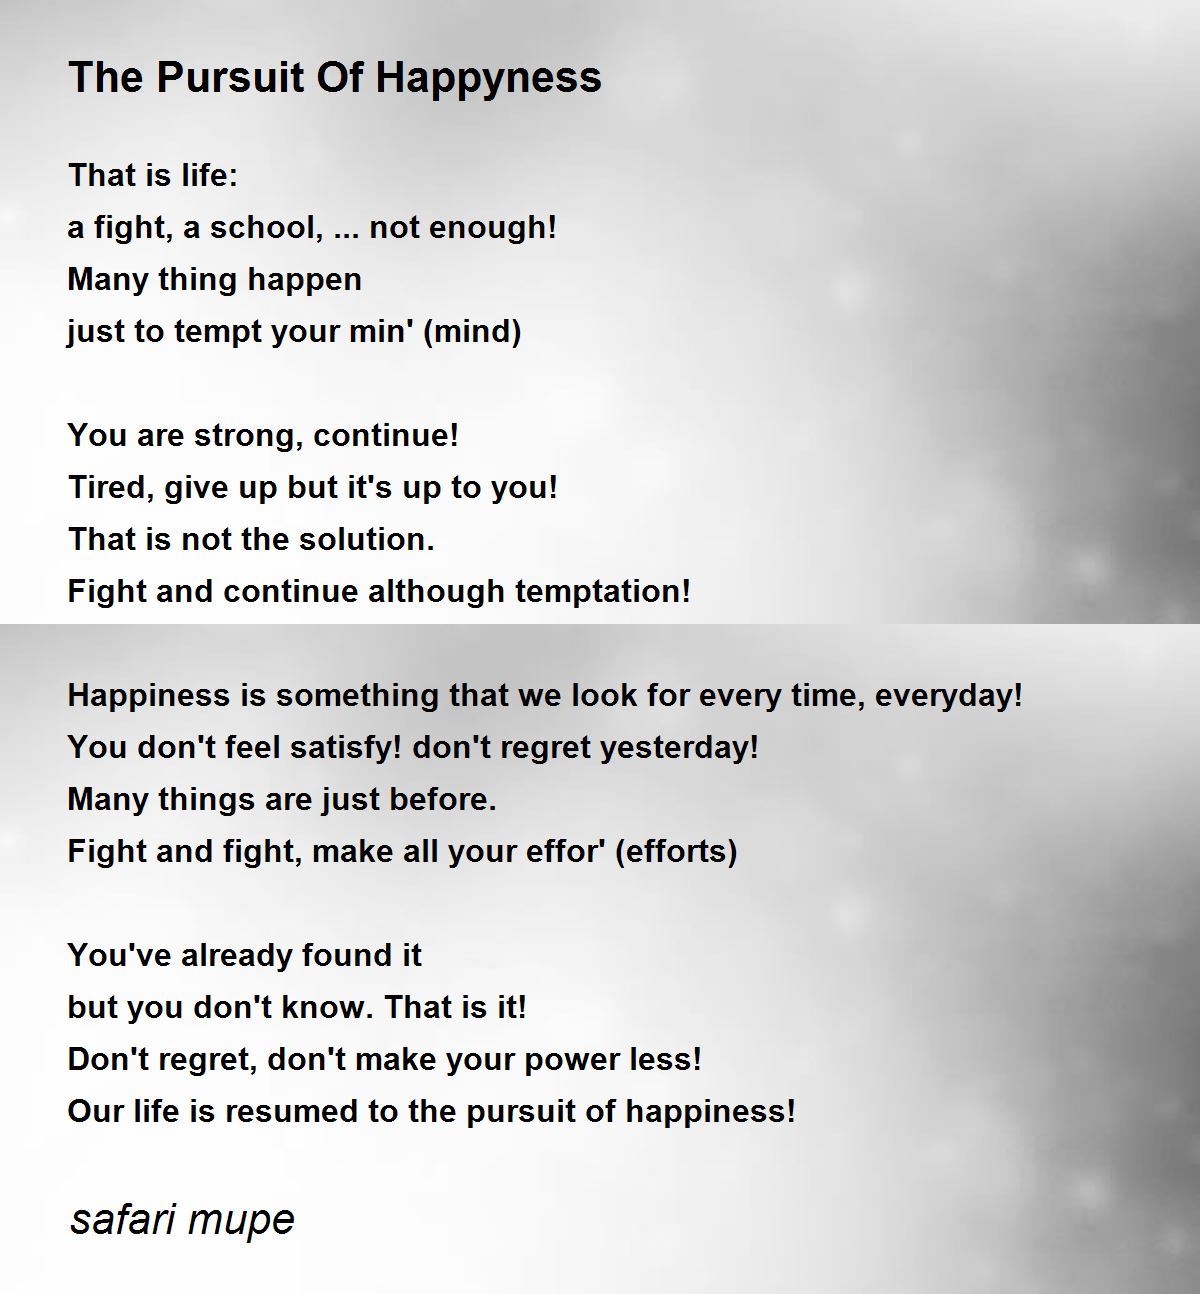 The Pursuit of Happiness | JFK Library